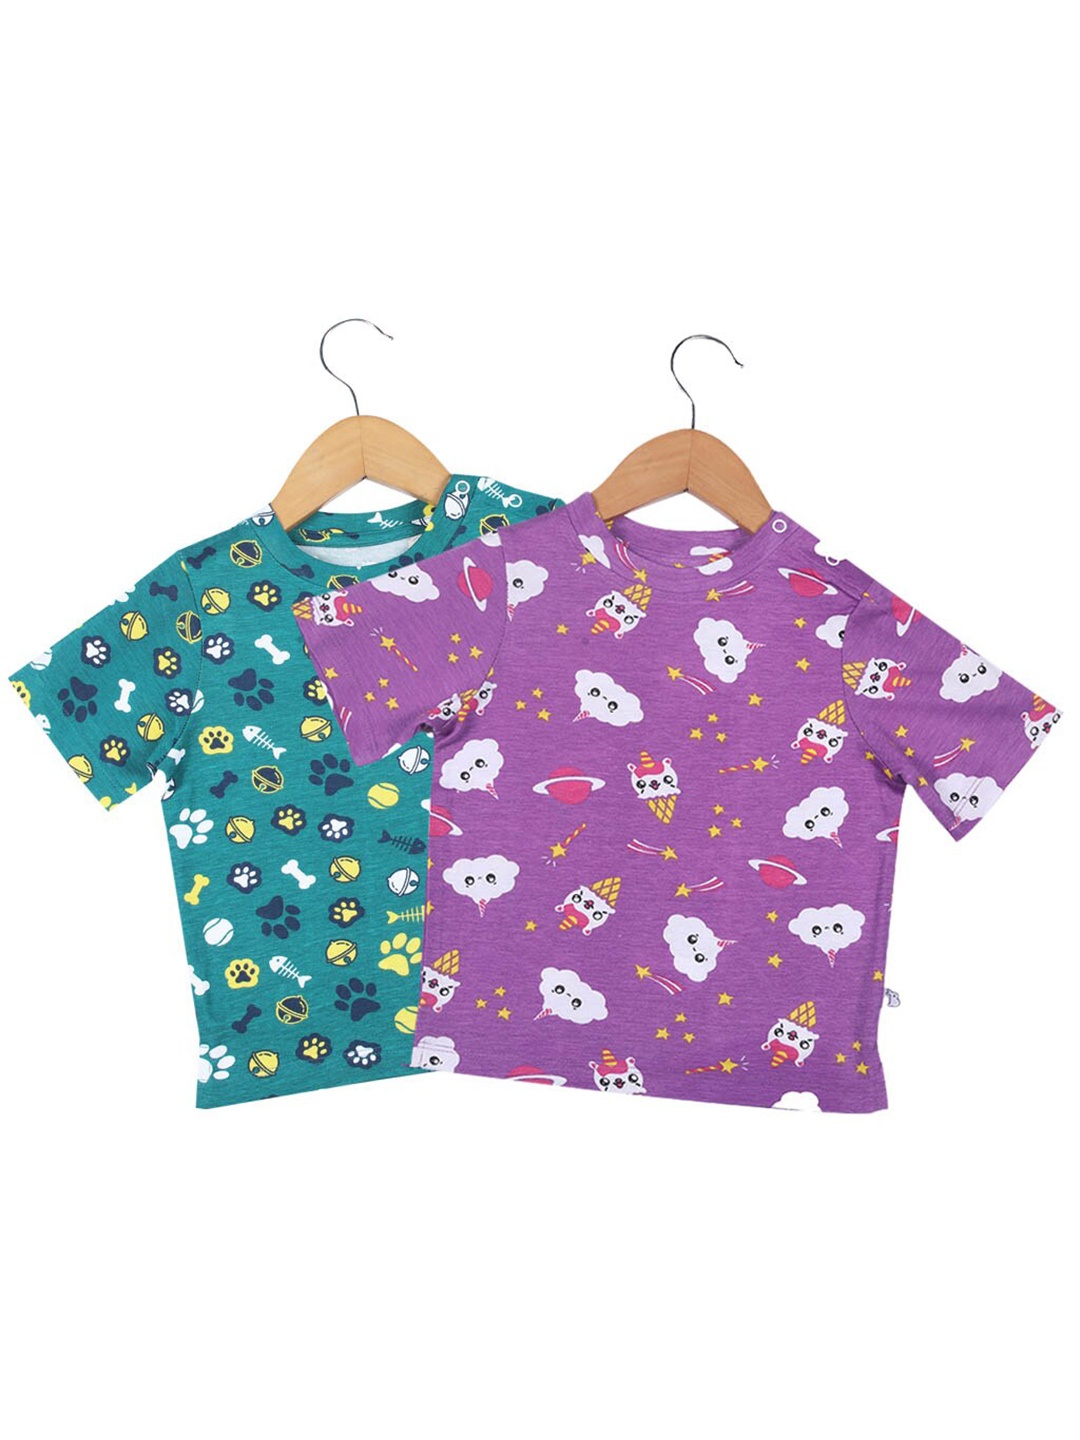 

SuperBottoms Kids Pack of 2 Printed Sustainable T-shirt, Purple